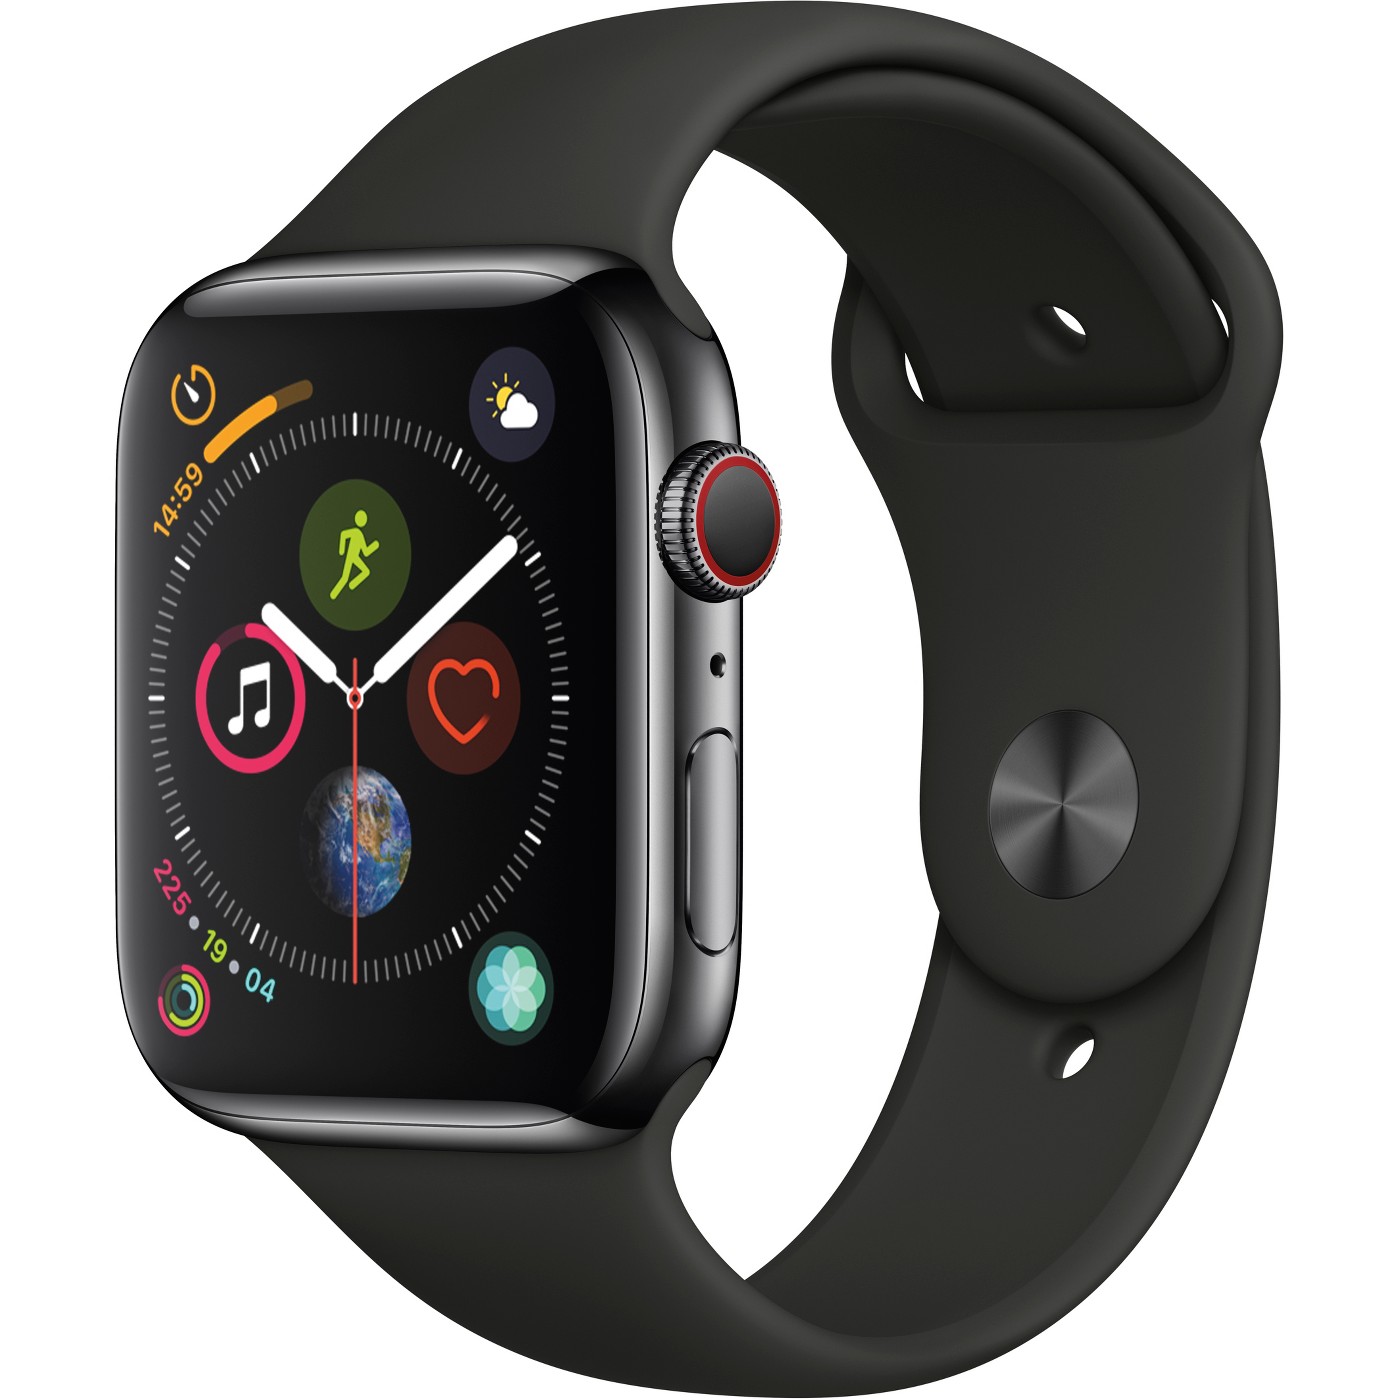 Apple Watch Series 4 GPS + Cellular - 44mm - Sport Band - Stainless Steel Case - image 1 of 2